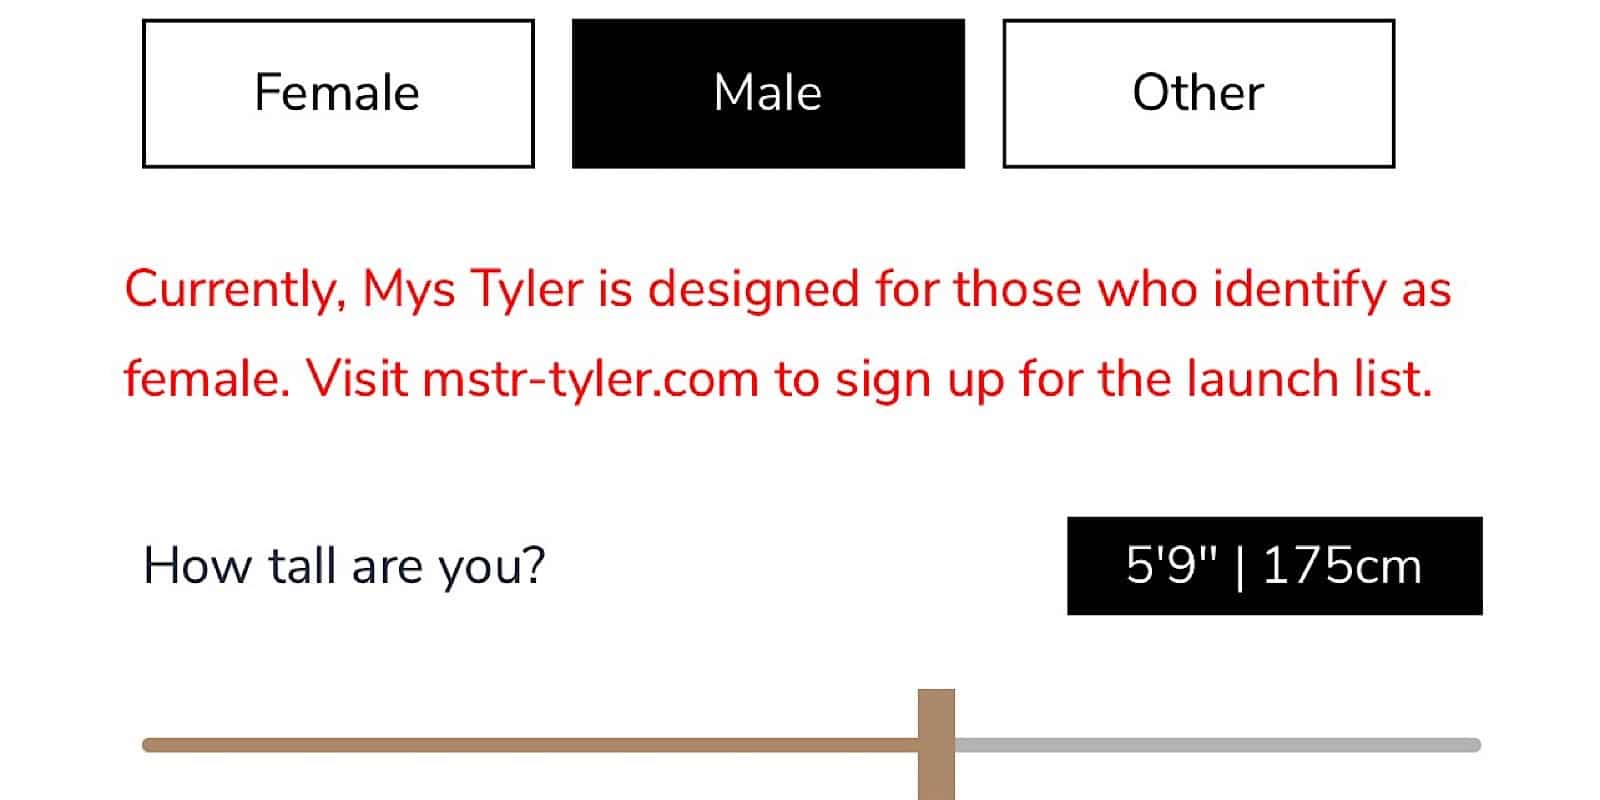 Mys Tyler is only for women, but apparently Mstr Tyler is coming later for men.